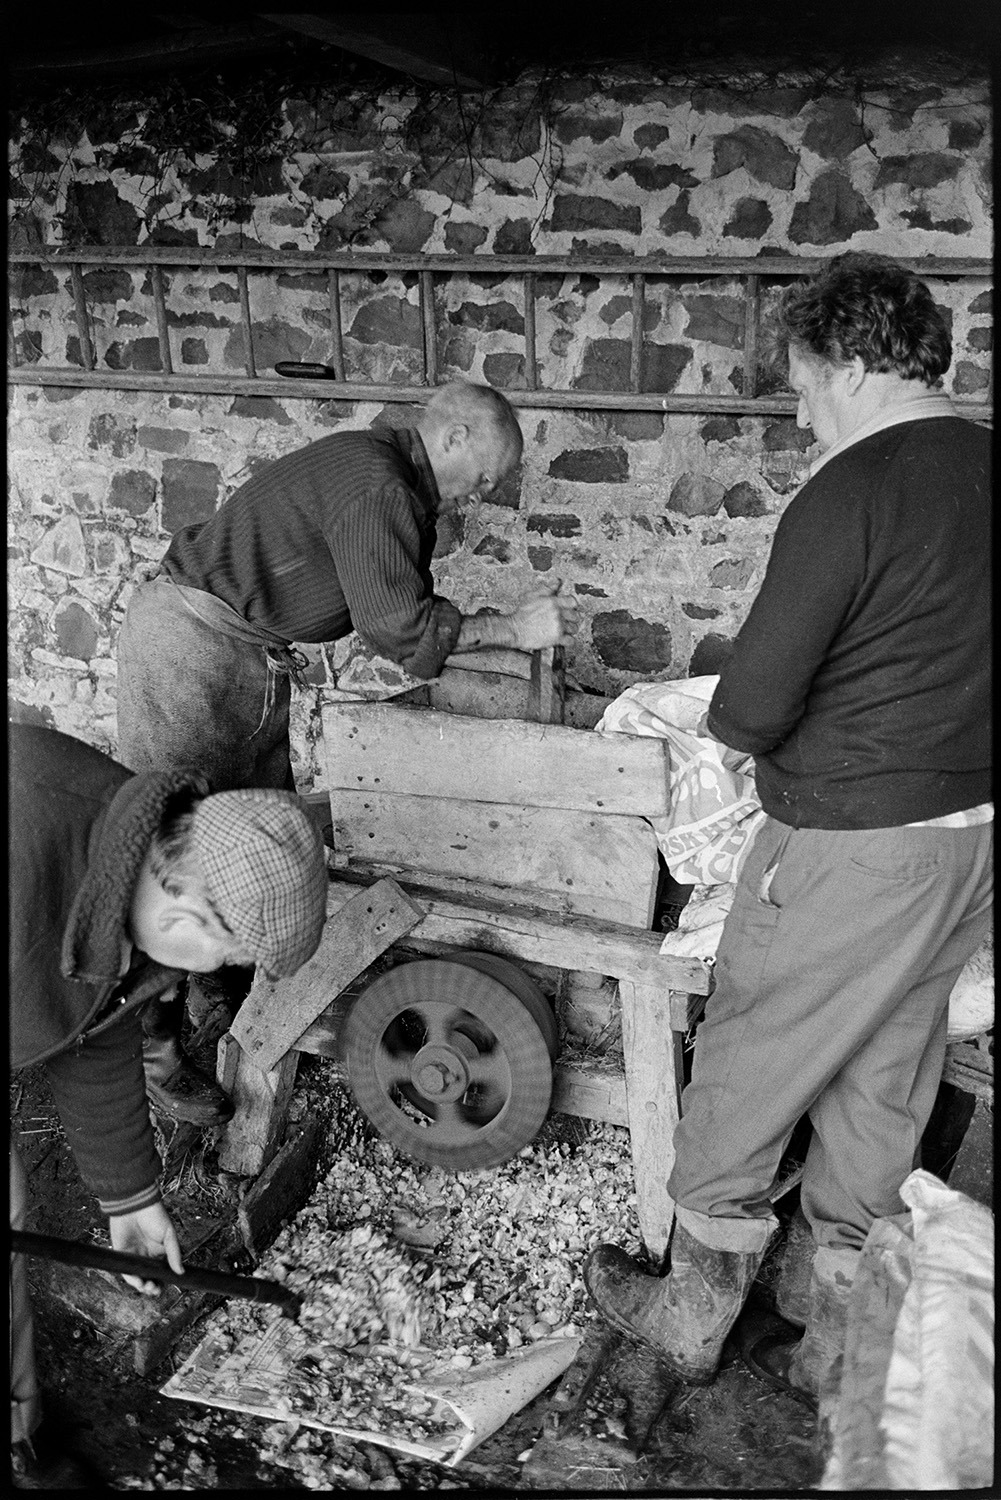 Orchards, Devon, man operating cider press, making cheese, crushing cider apples. 
[Bill Hammond, on the left, and another man, pulping apples in an apple crusher, in a stone barn at Rashleigh Mill, Bridge Reeve. Another man is shovelling the pulp to the cider press. A ladder is hung on the wall in the background.]